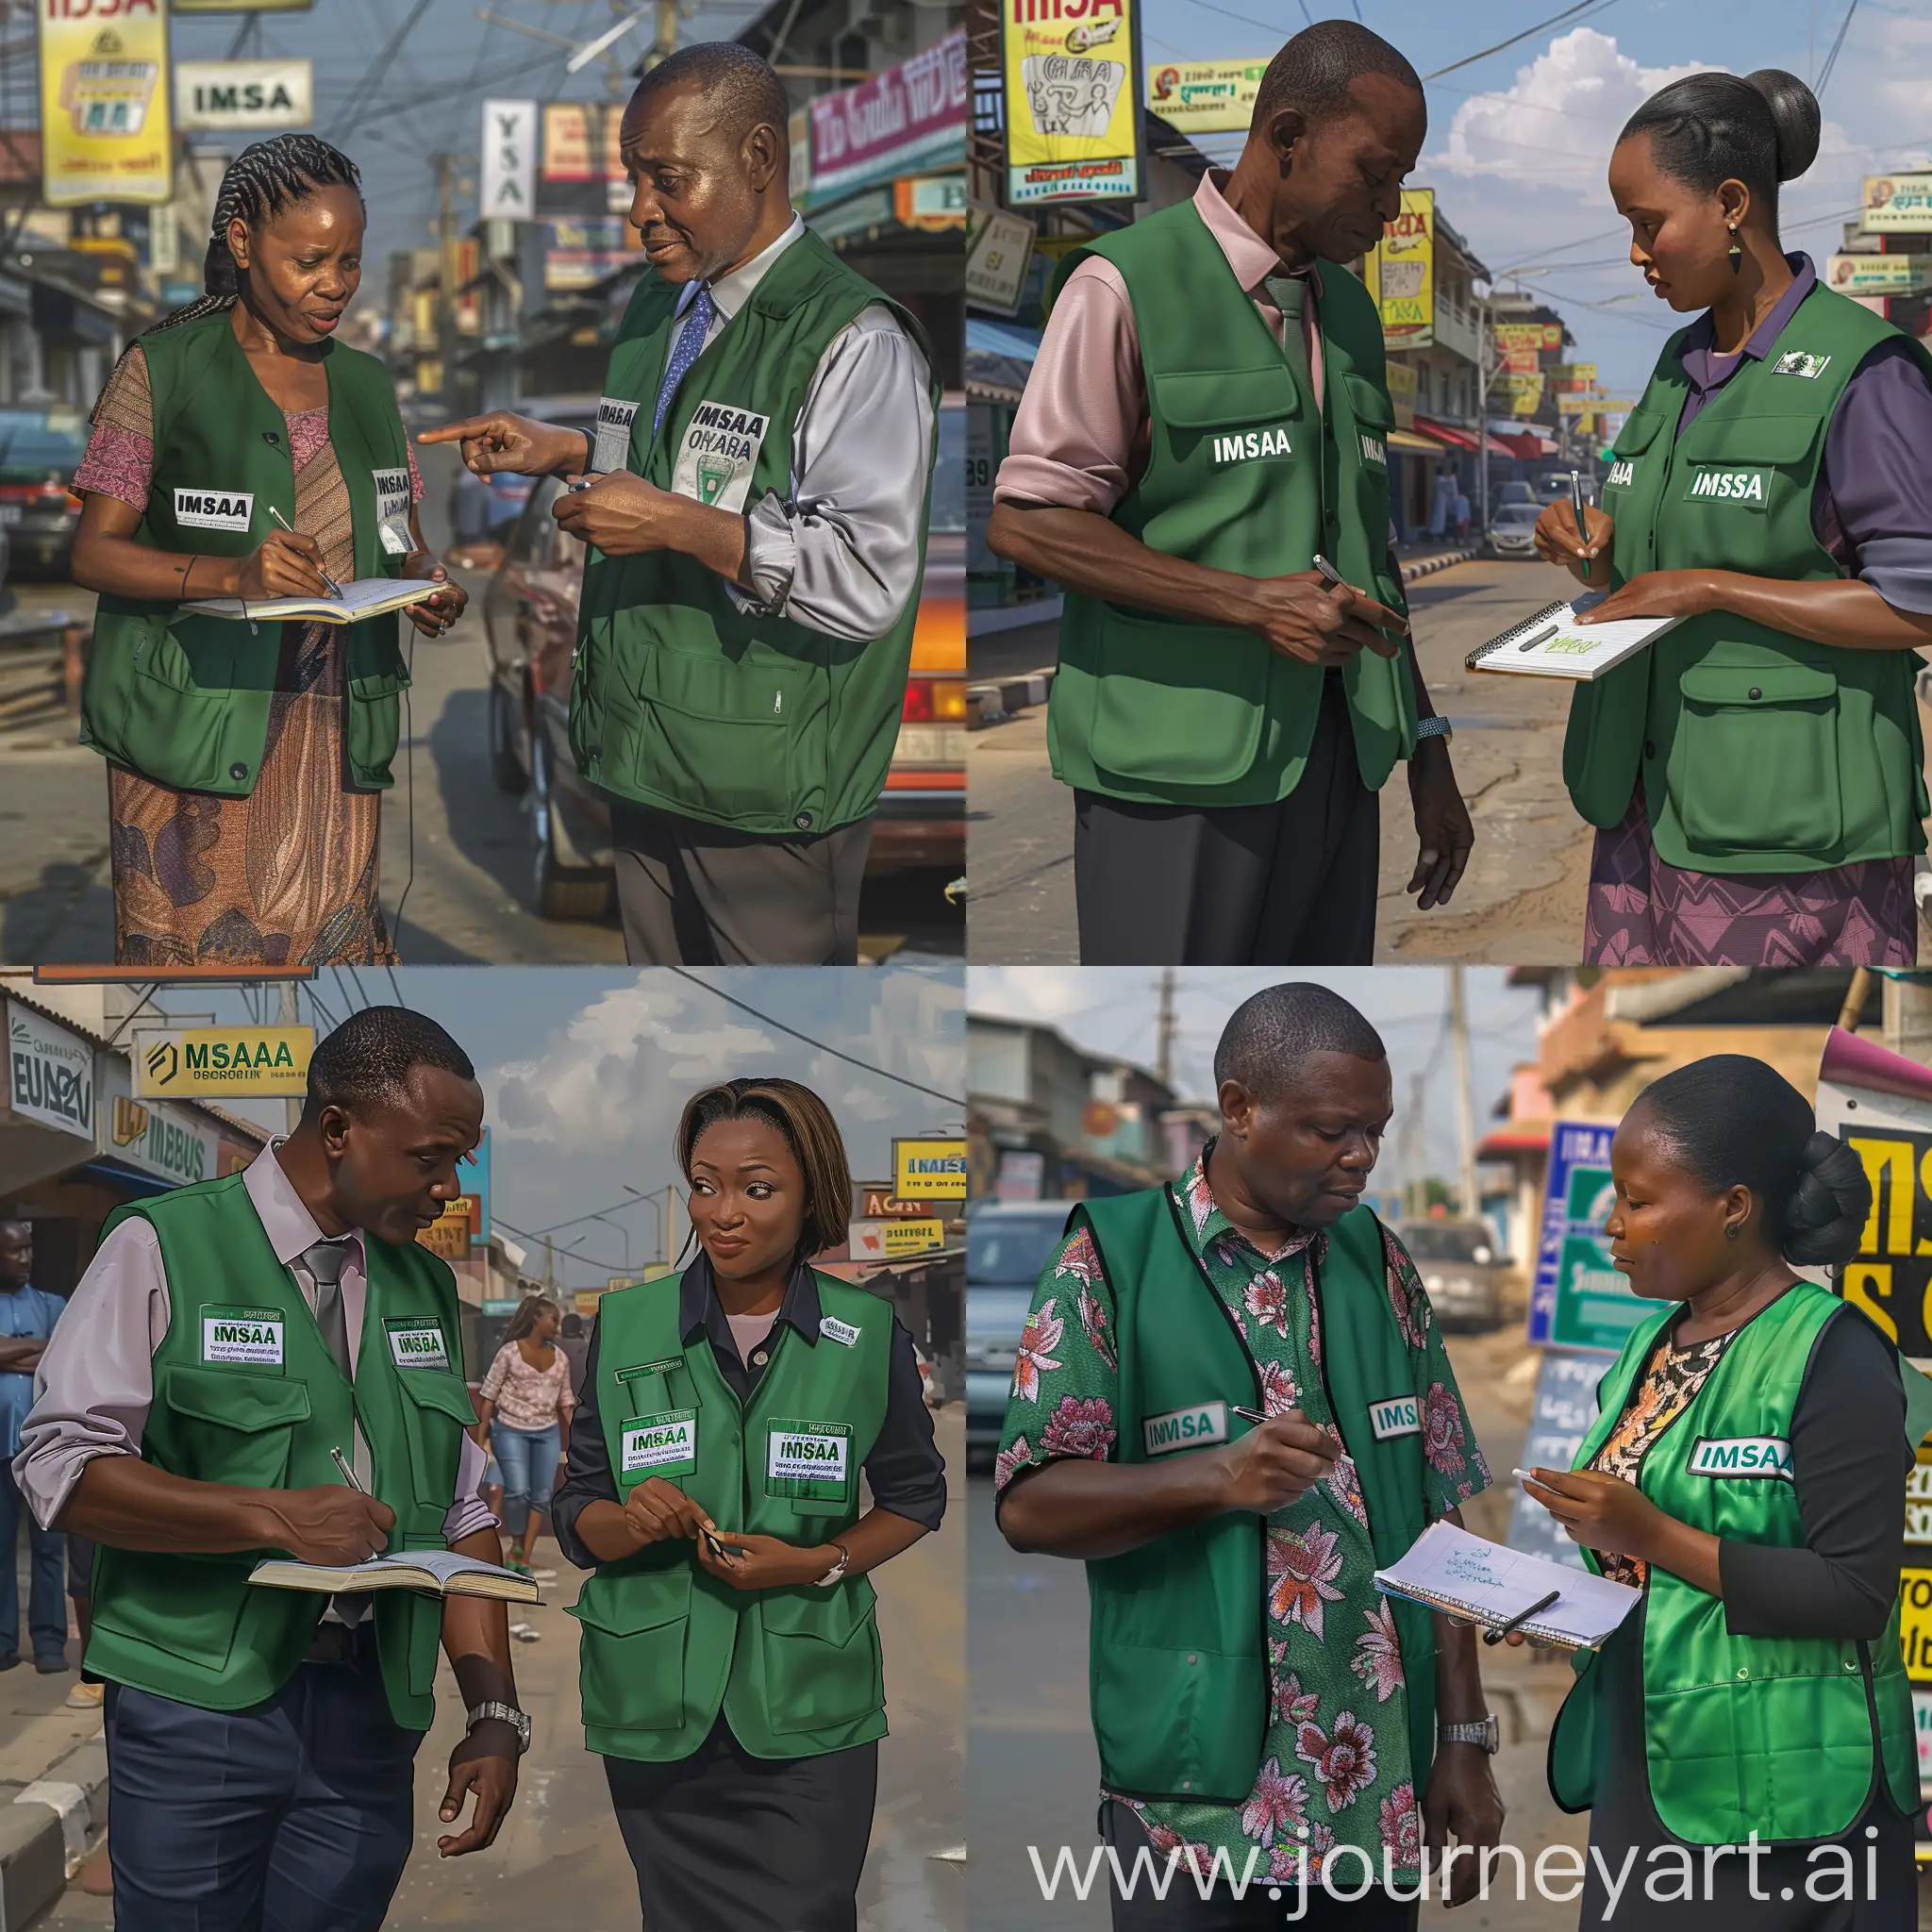 Professionally-Dressed-Nigerian-Business-Couple-Counting-Signage-in-Owerri-Nigeria